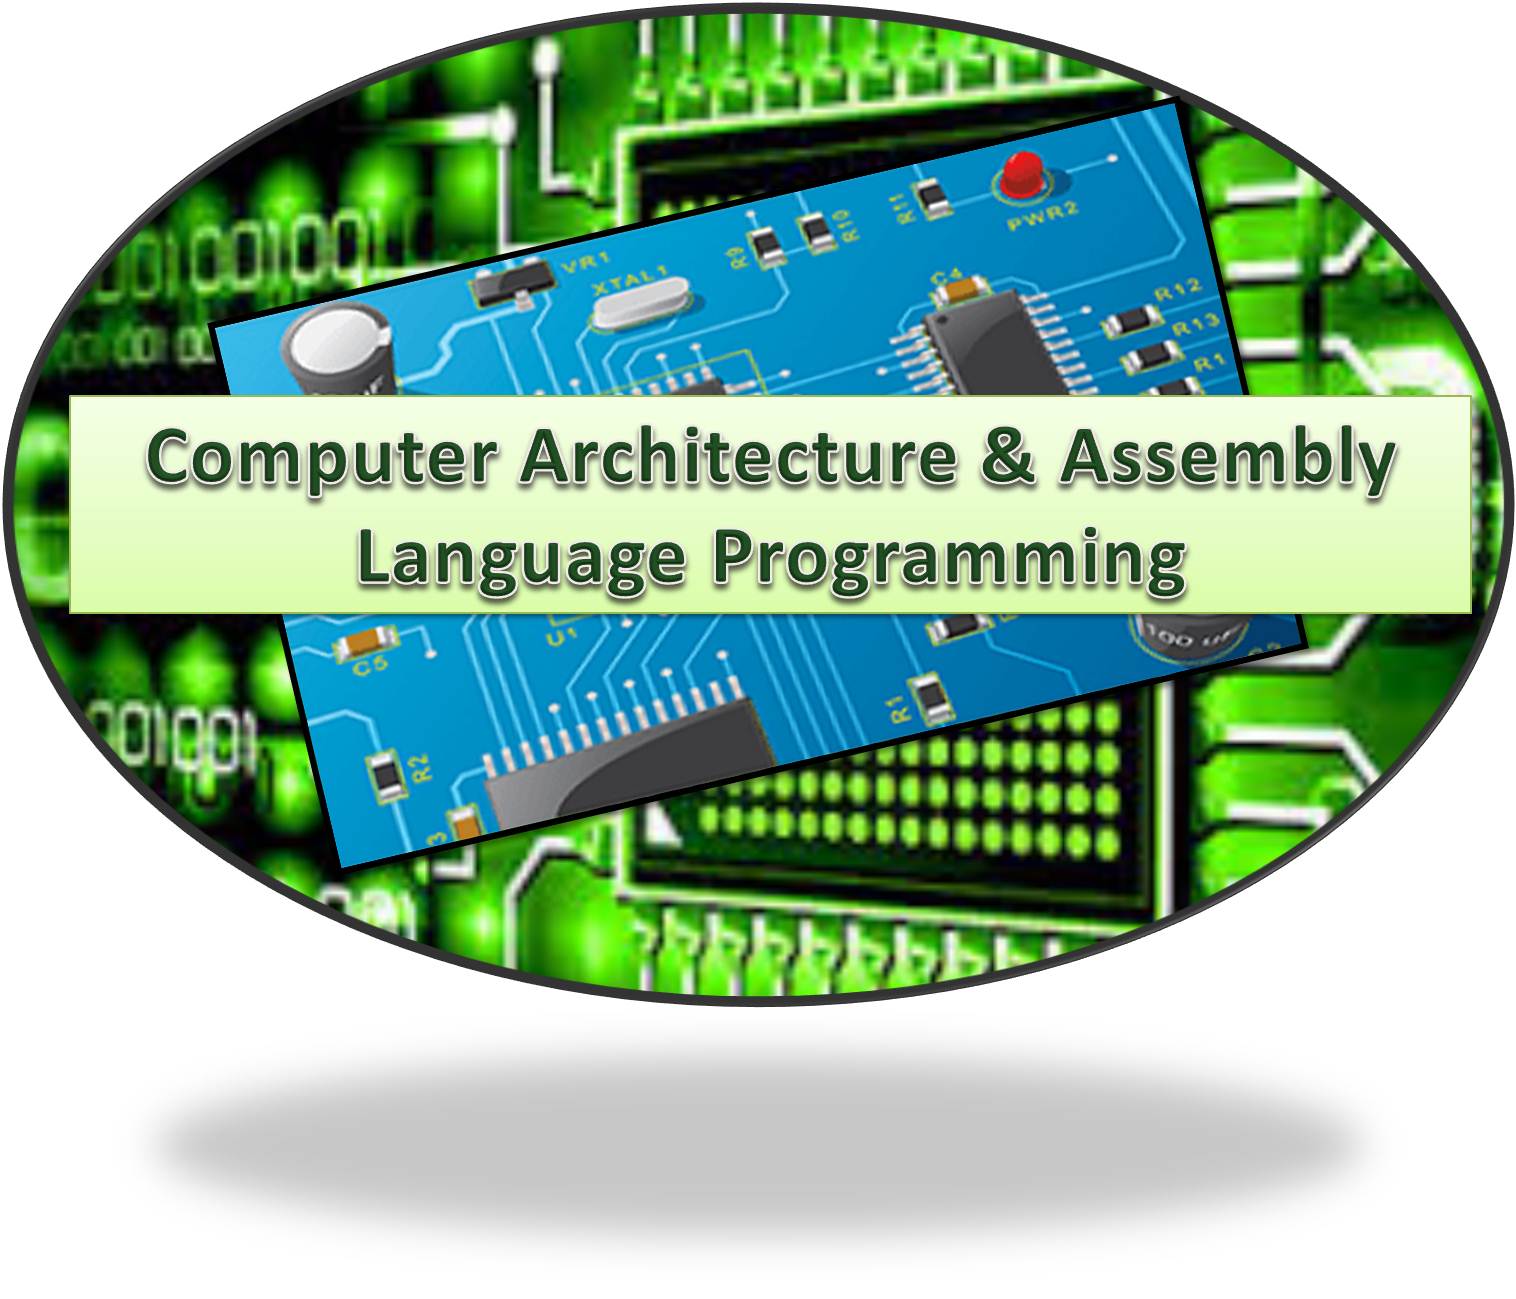 http://study.aisectonline.com/images/Computer Architecture and Assembly Language Programming.jpg